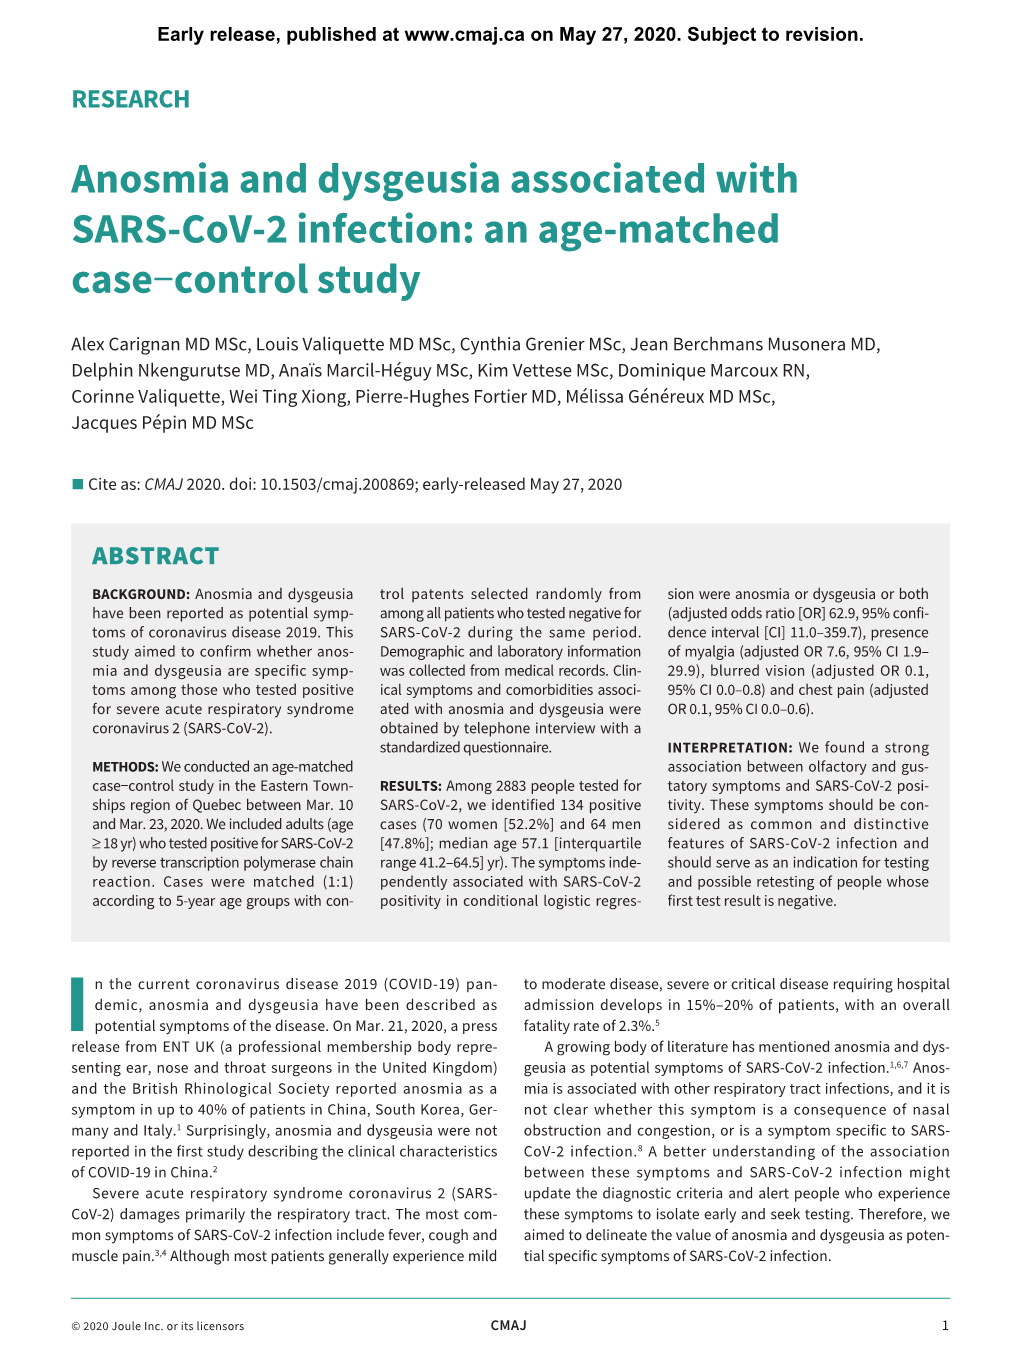 Anosmia and Dysgeusia Associated with SARS-Cov-2 Infection: an Age-Matched Case−Control Study